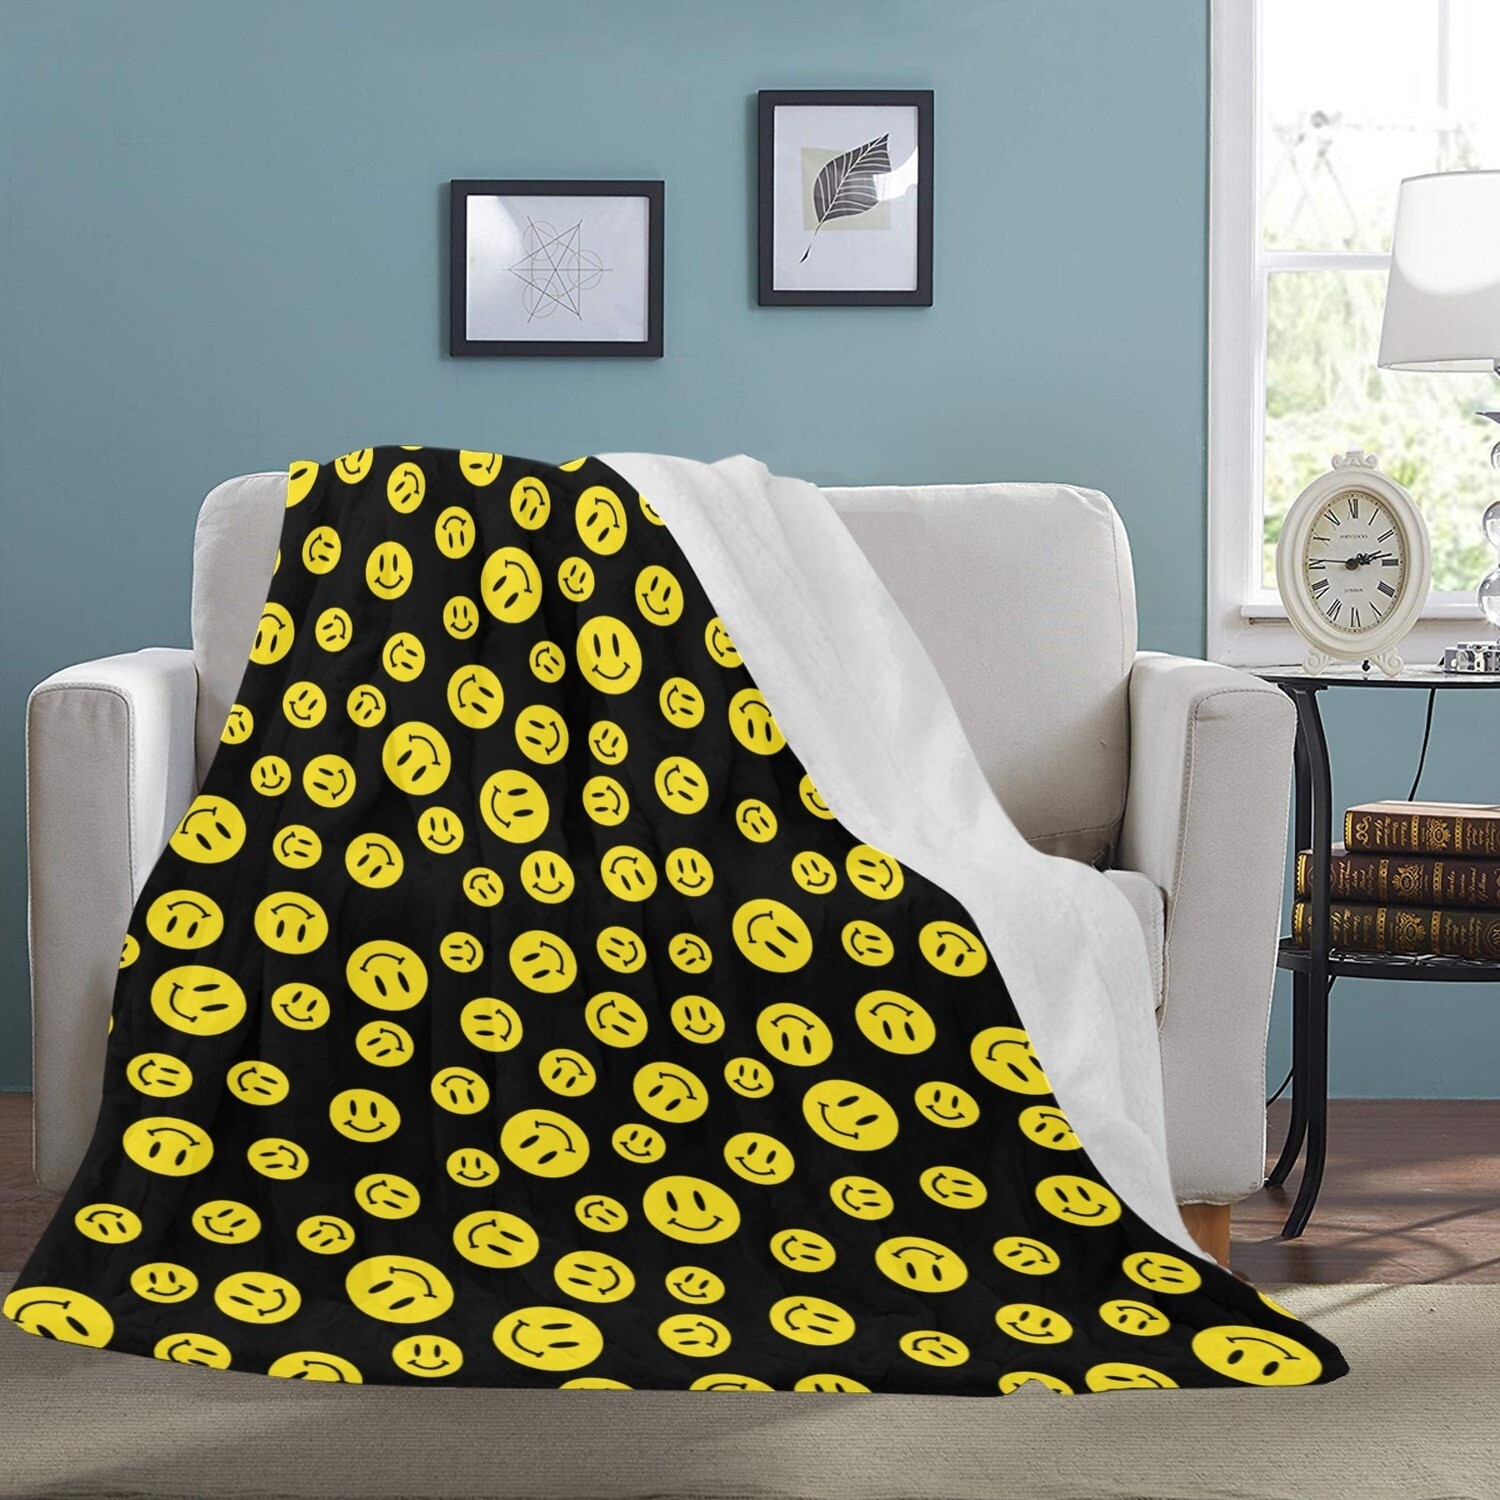 🤴🏽👸🏽😃 Large Ultra-Soft Micro Fleece Blanket Happy faces, Yellow Smileys, Emojis, gift, gift for her, gift for him, gift for them, 70"x80", black